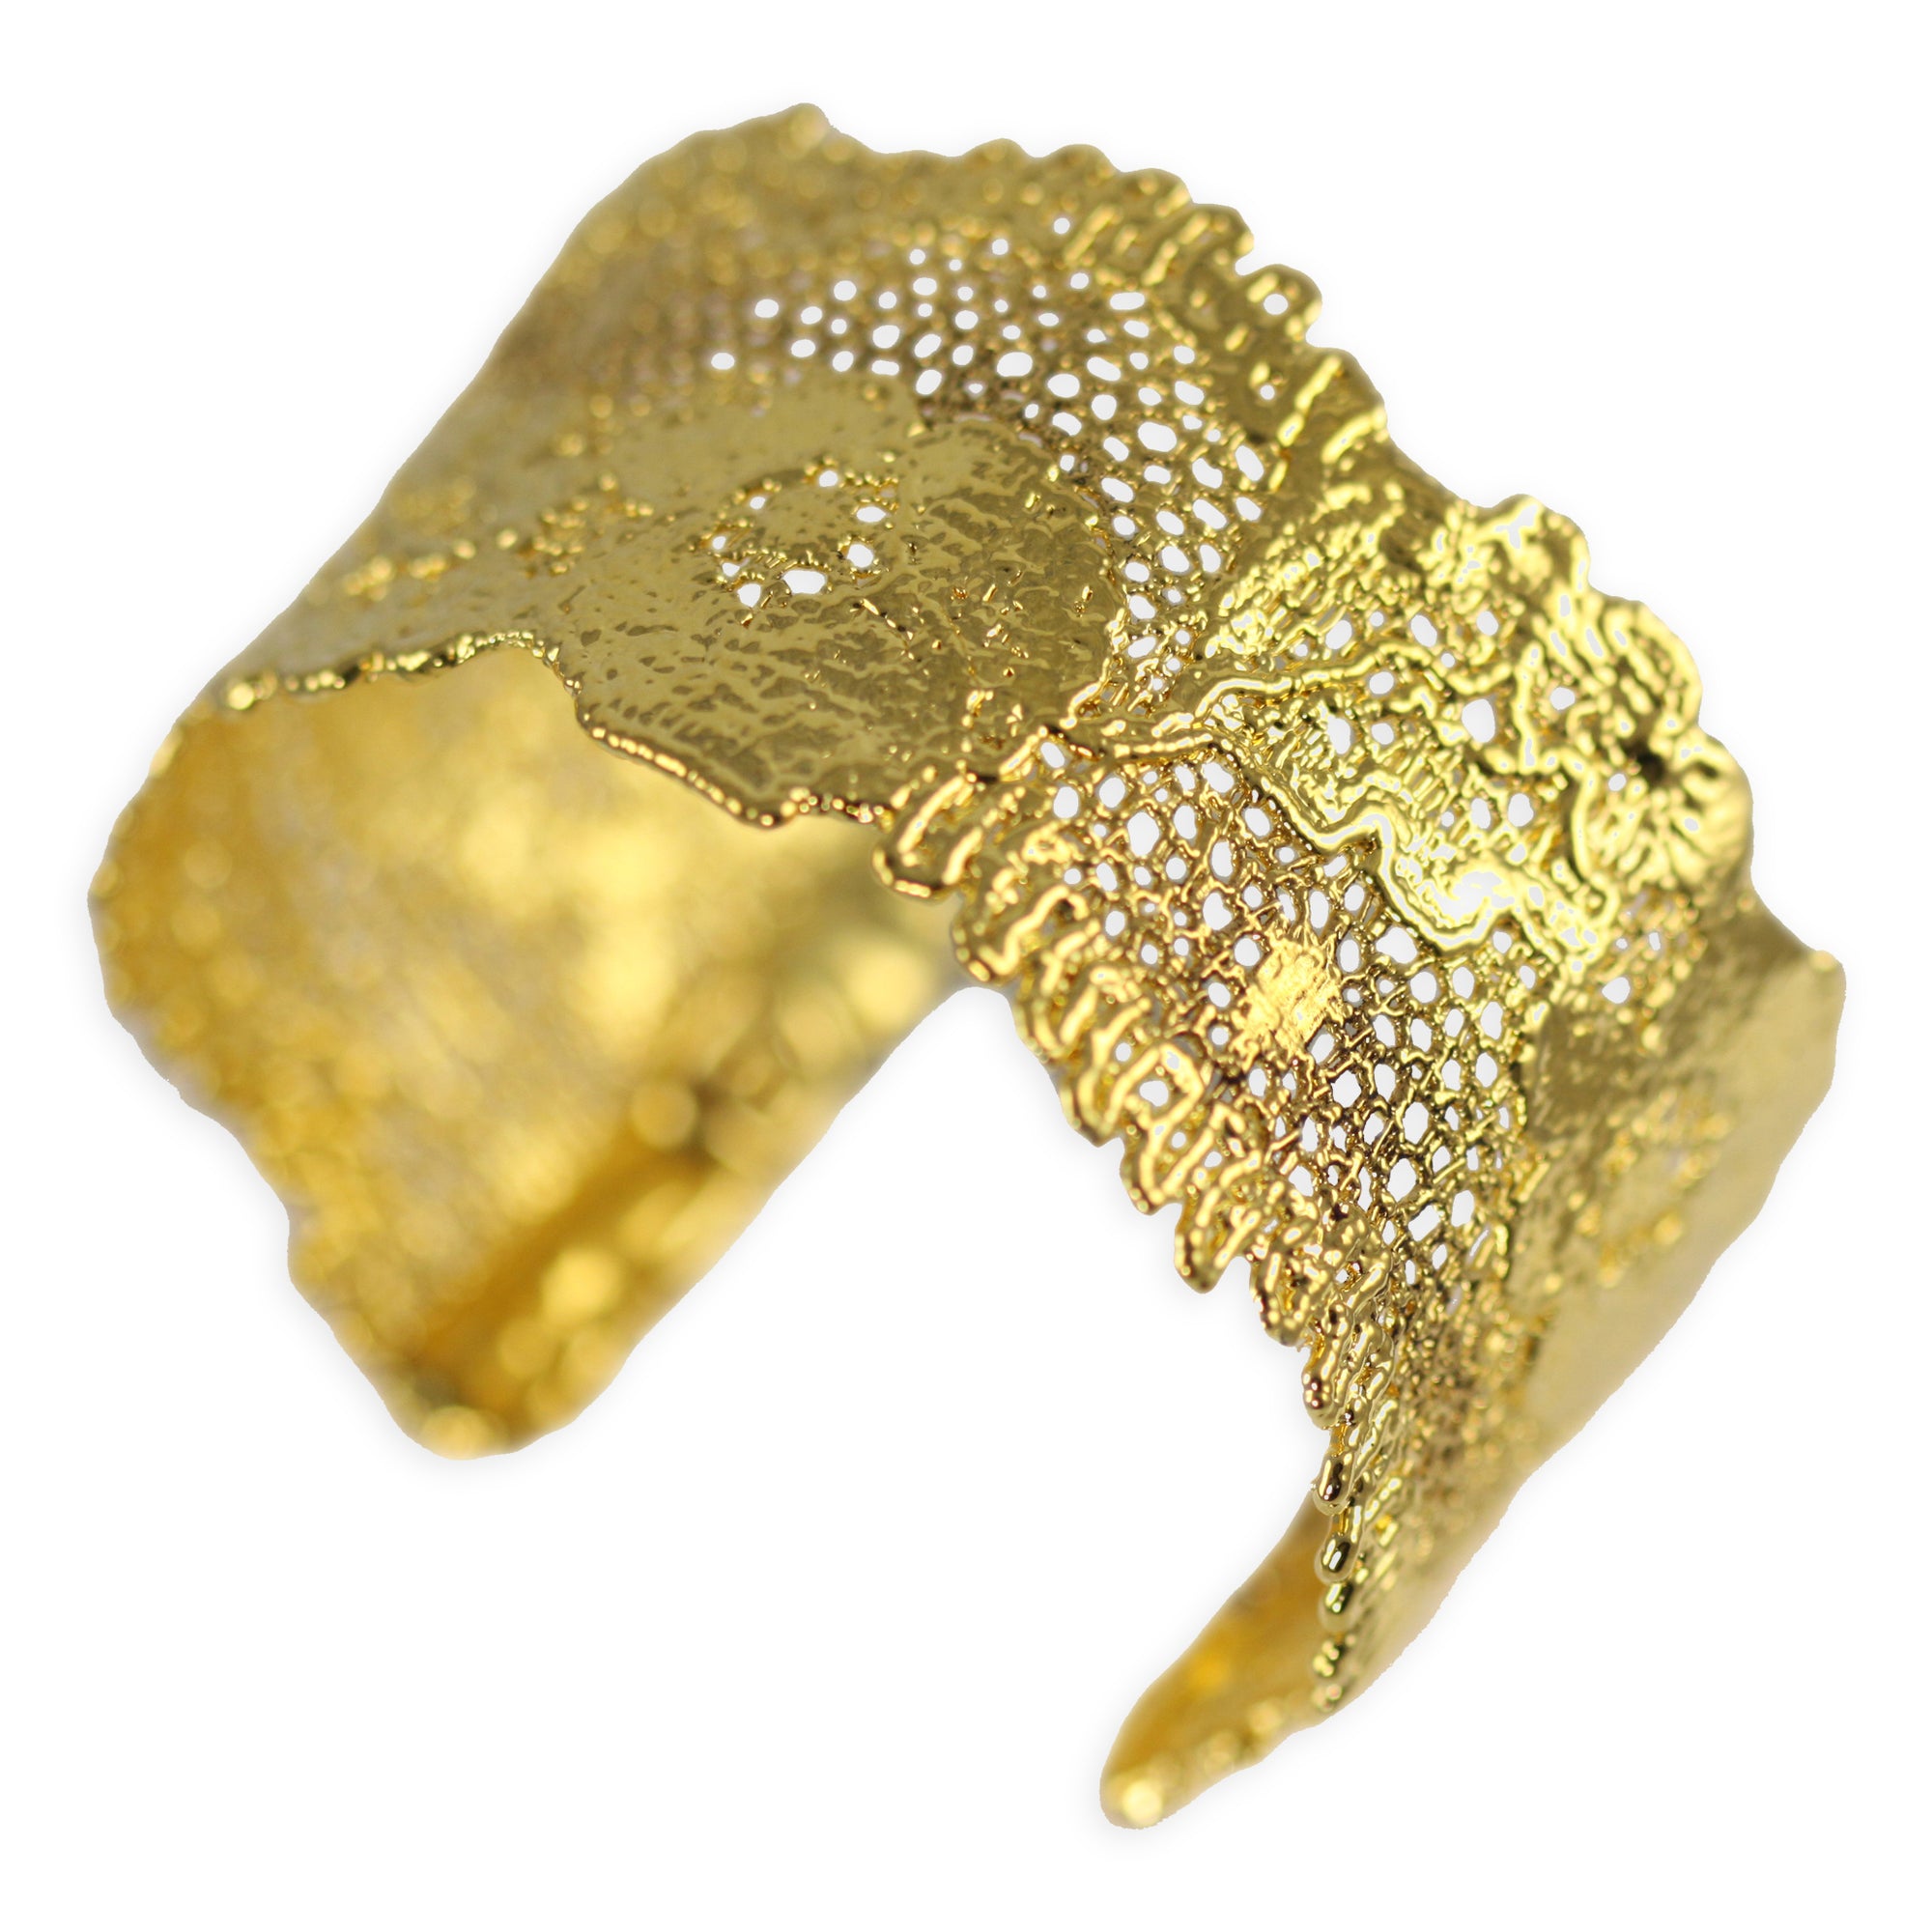 Donna lace cuff bracelet in 24k gold. Double scalloped flower lace.